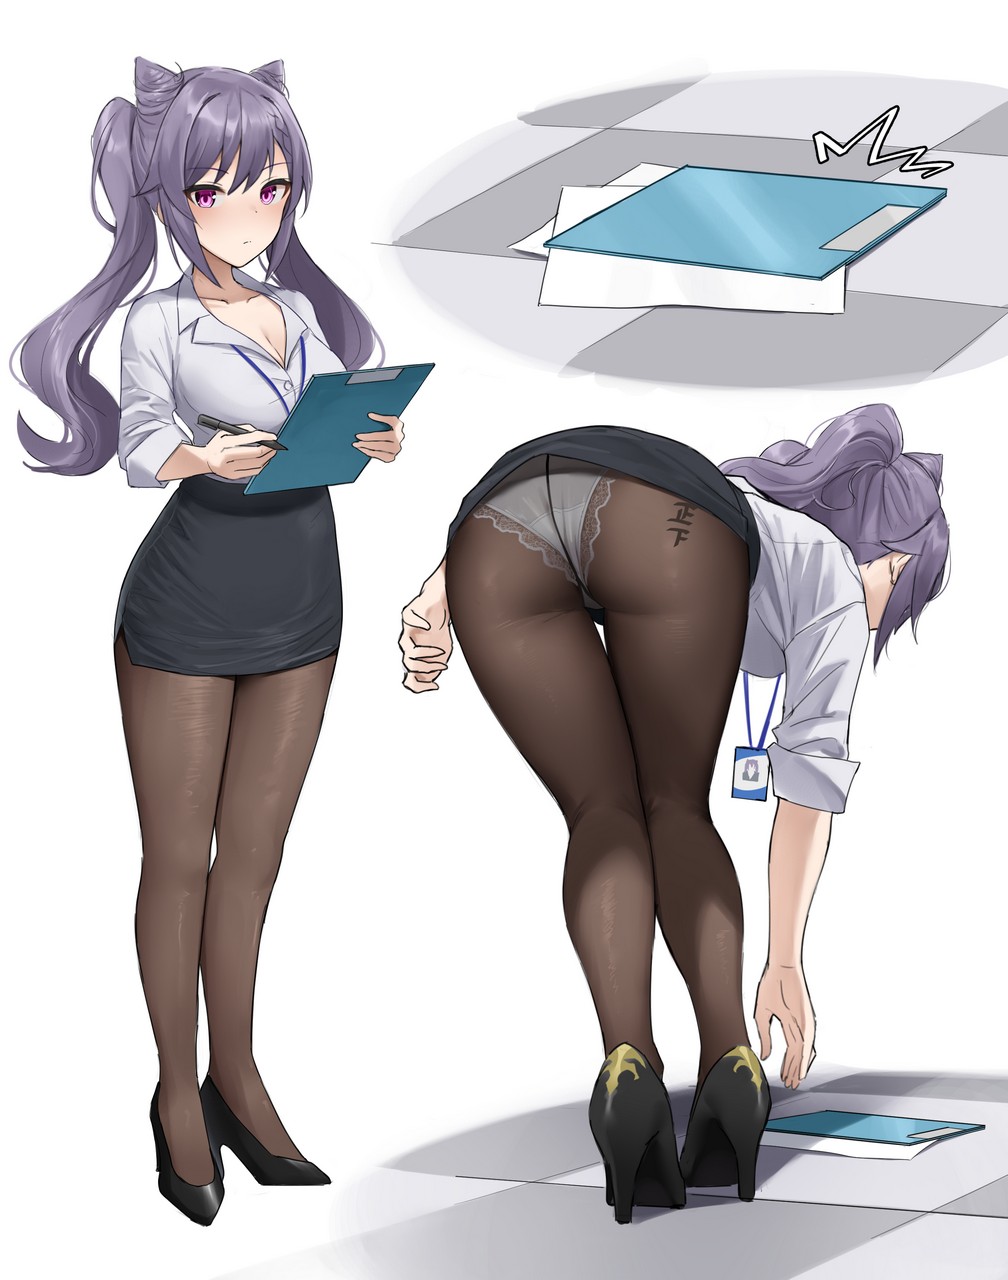 Keqing Accidentally Dropping Her Files By Thighdeolog